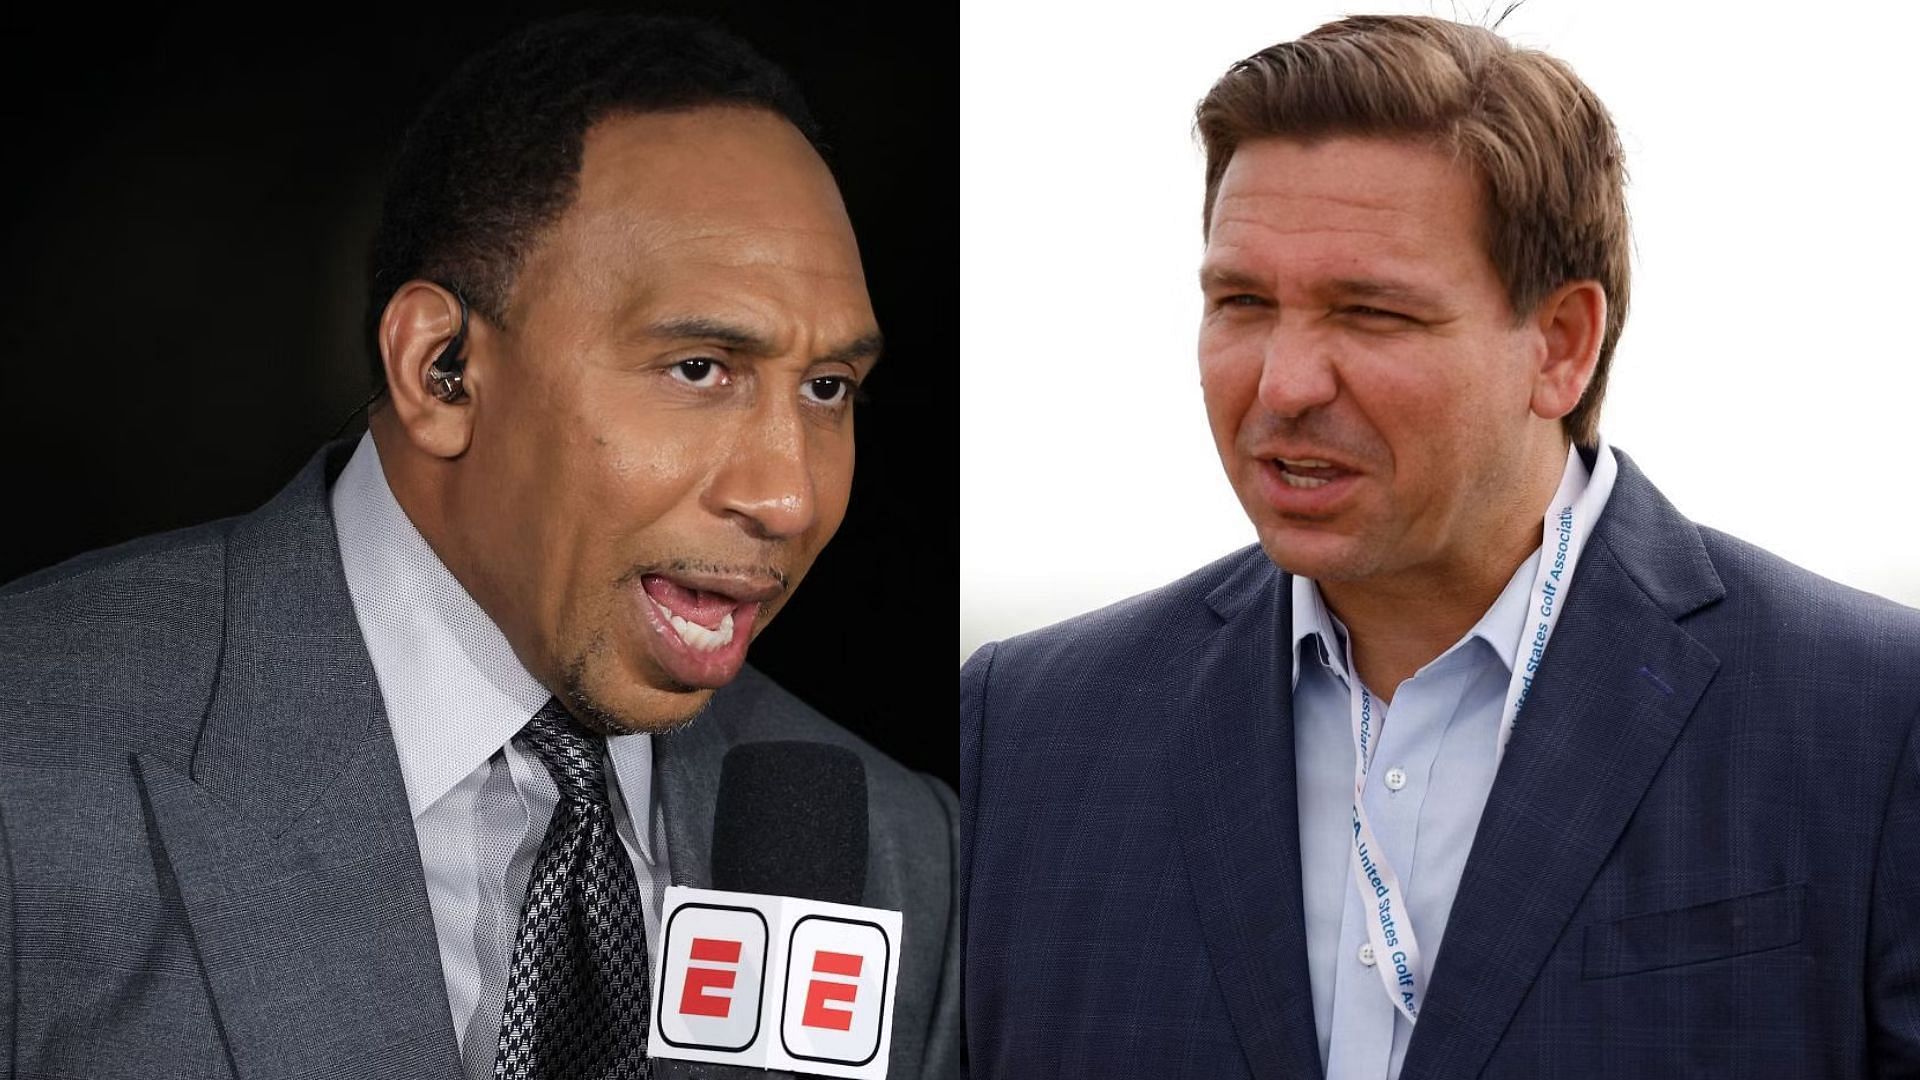 Stephen A Smith gave his take on the recent Florida protest that featured Nazi flags and a sign expressing support for Ron DeSantis